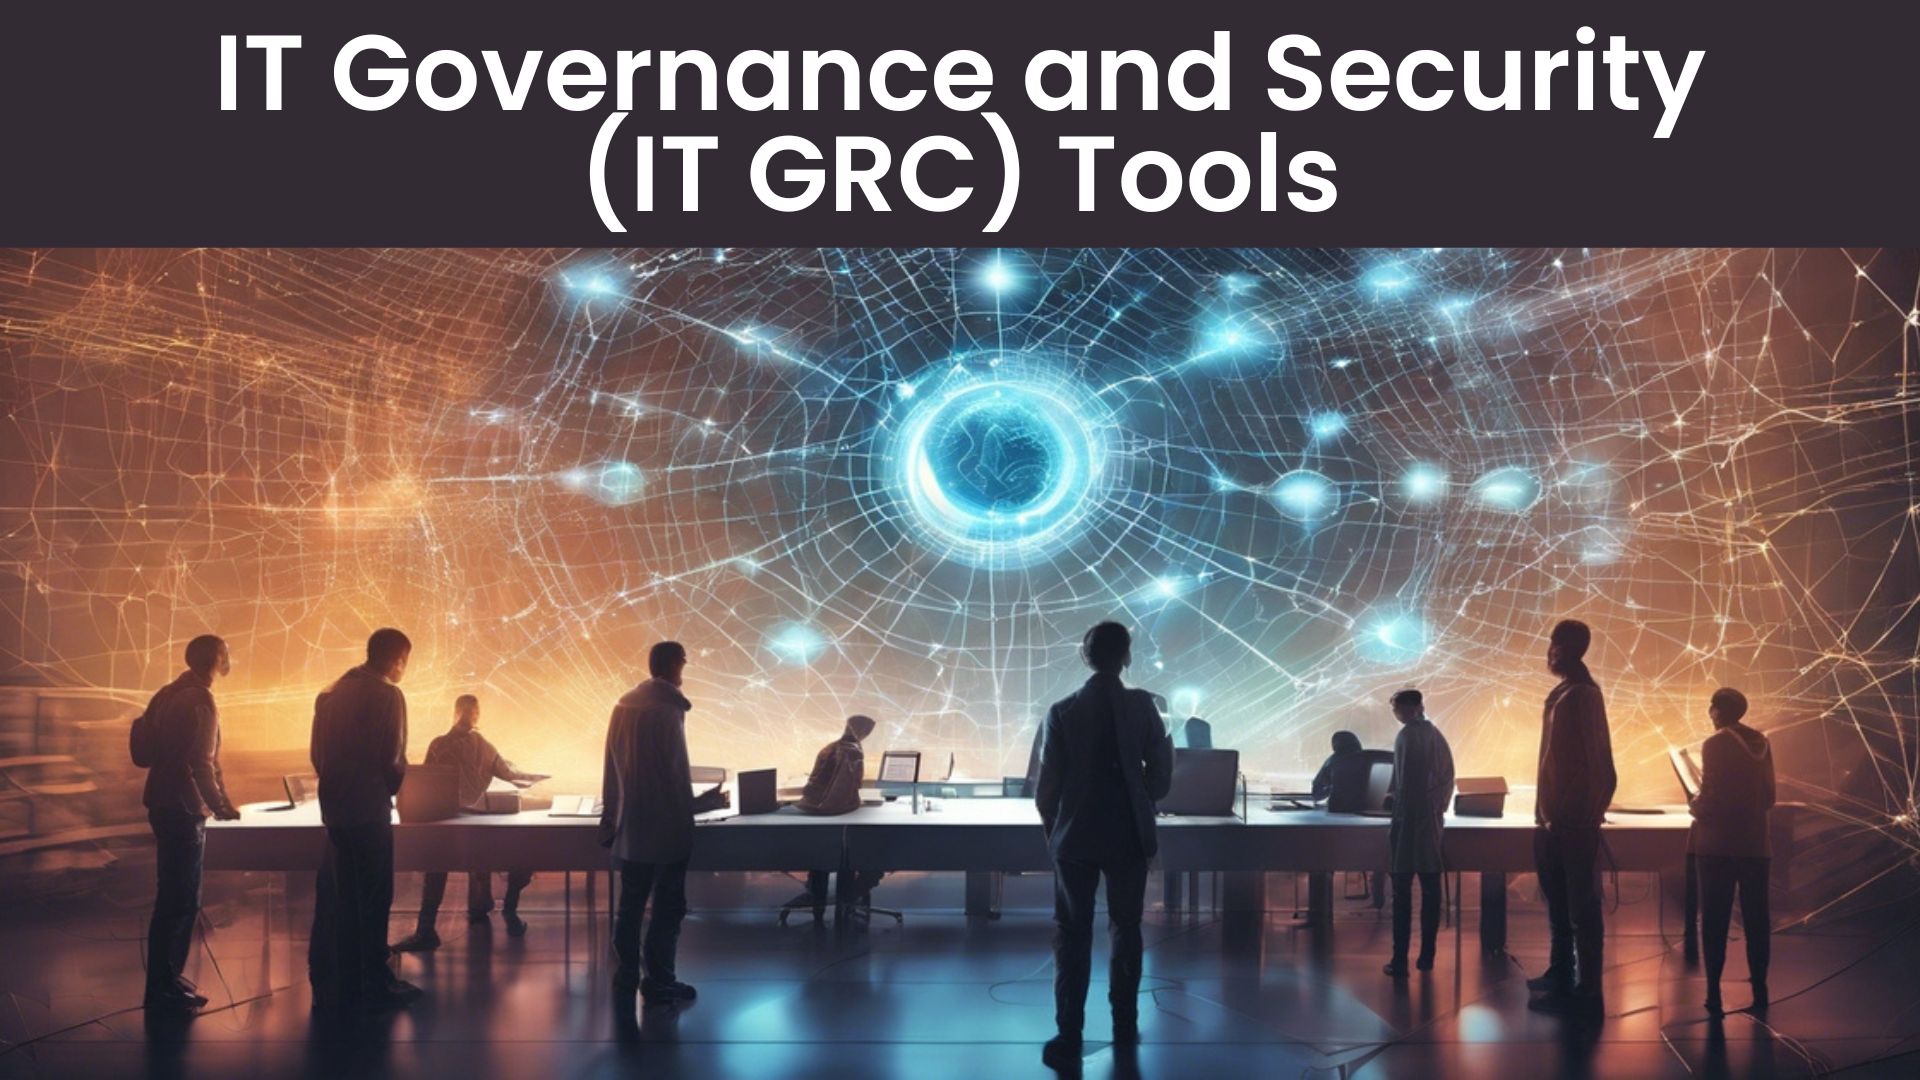 IT Governance and Security (IT GRC) Tools